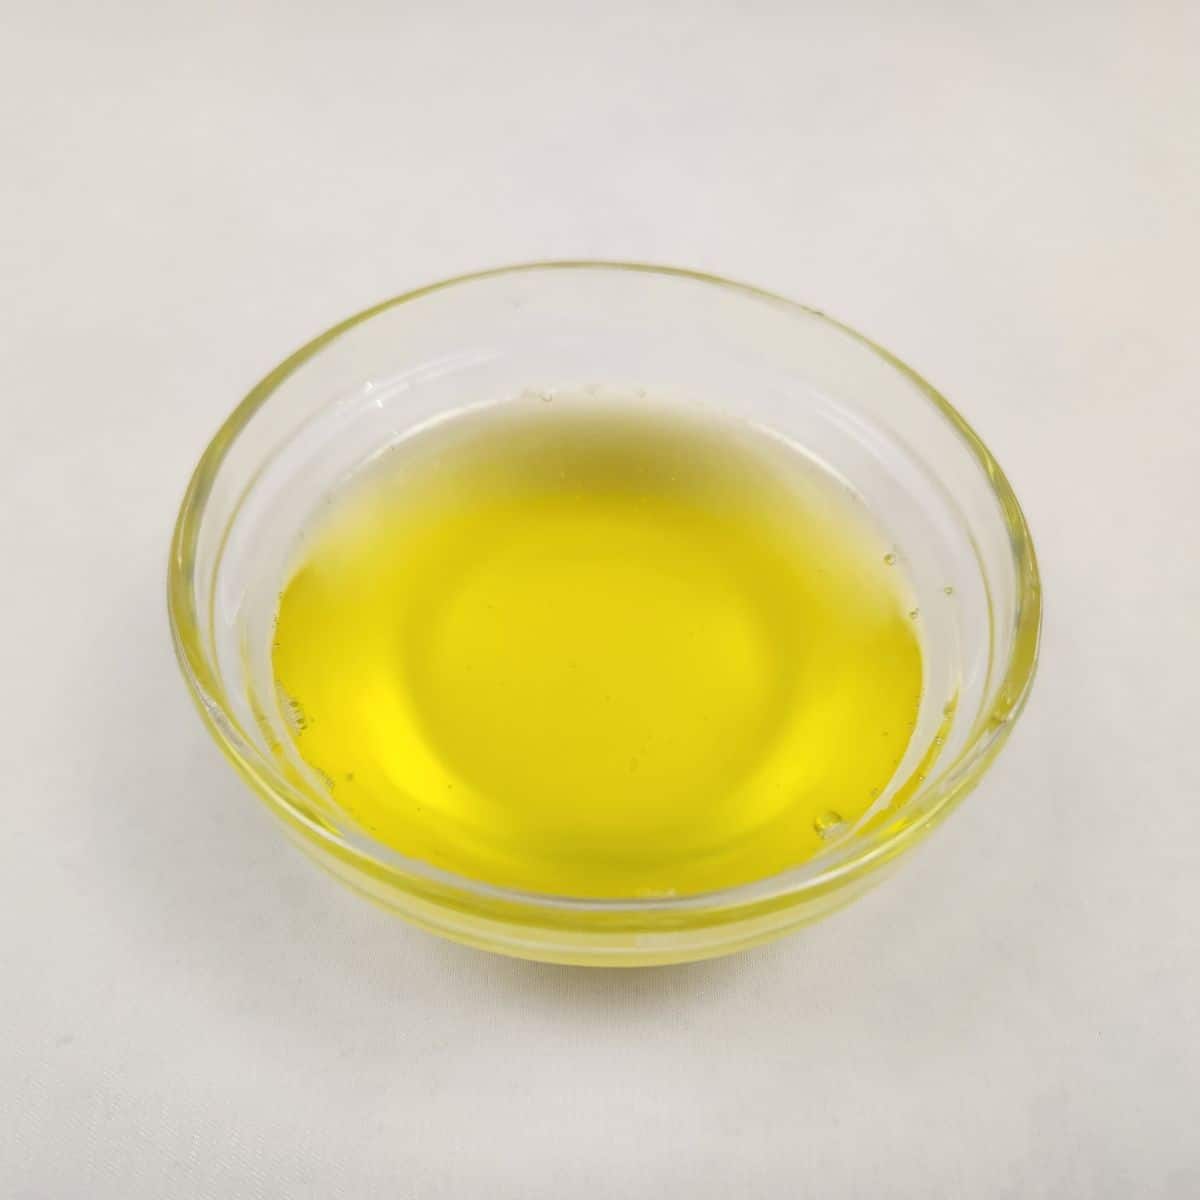 clarified butter in a bowl